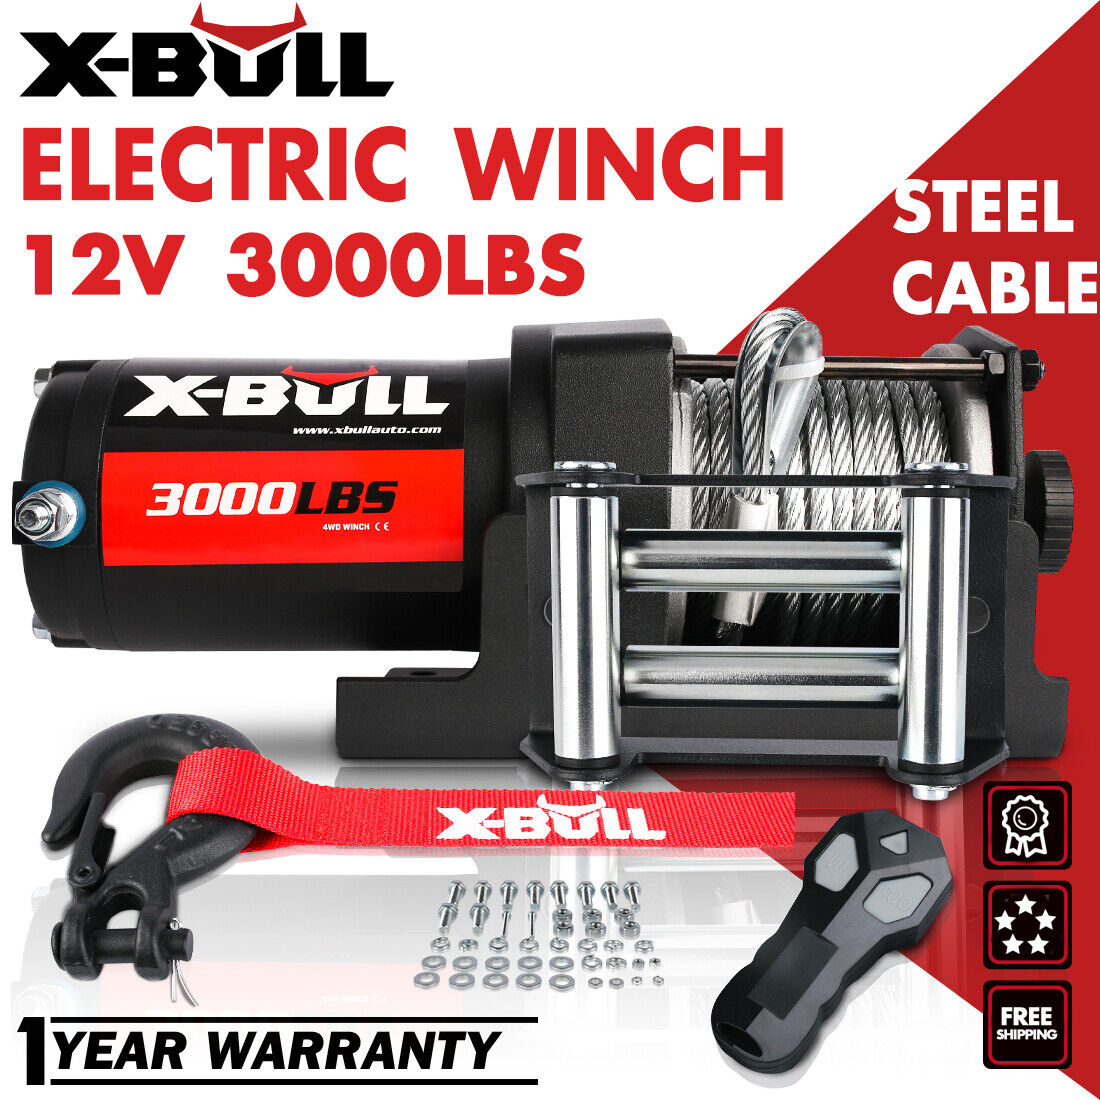 X-BULL 3000LBS 12V  Electric Winch Steel Cable  ATV UTV BOAT Towing Truck 4WD